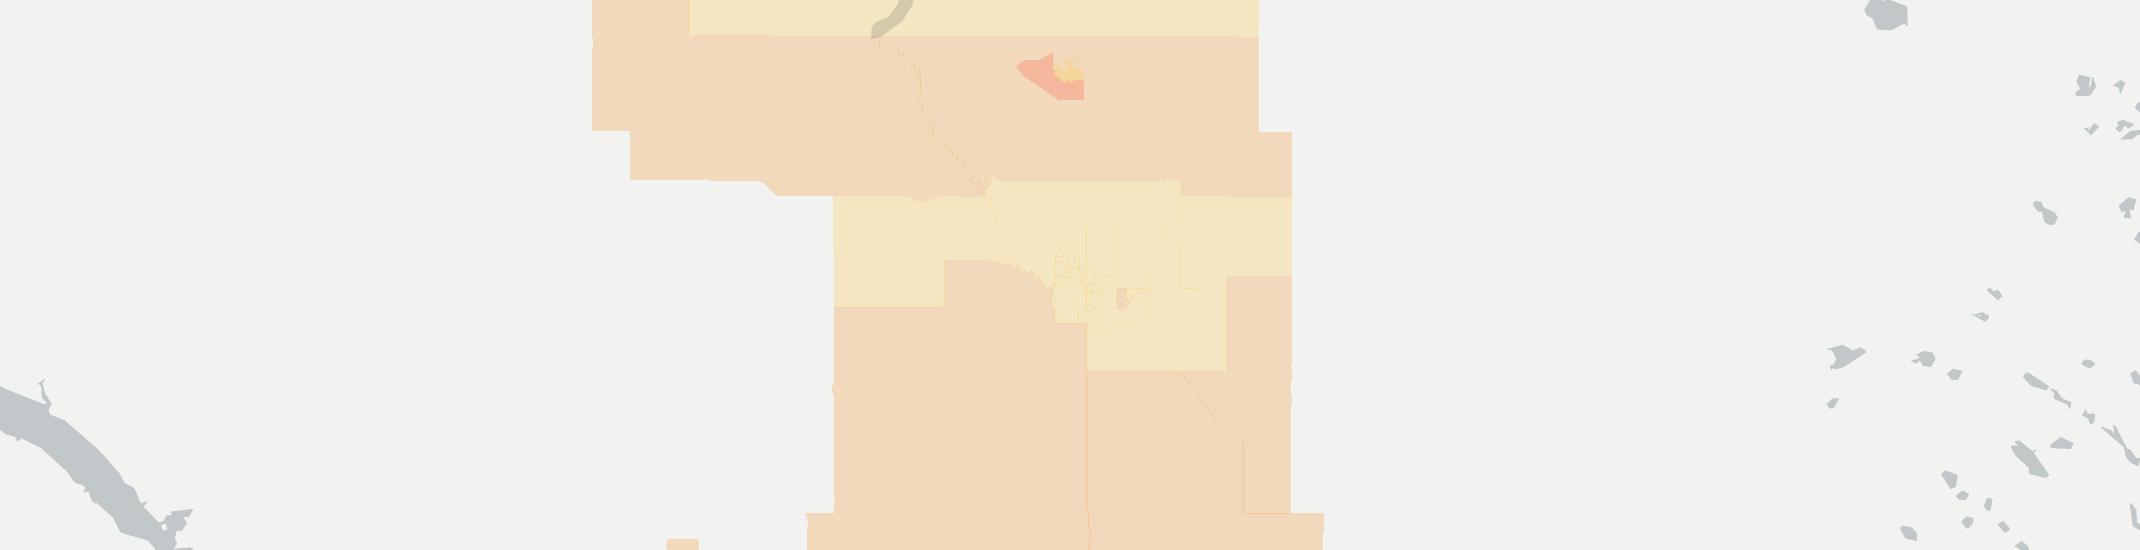 Minot Internet Competition Map. Click for interactive map.